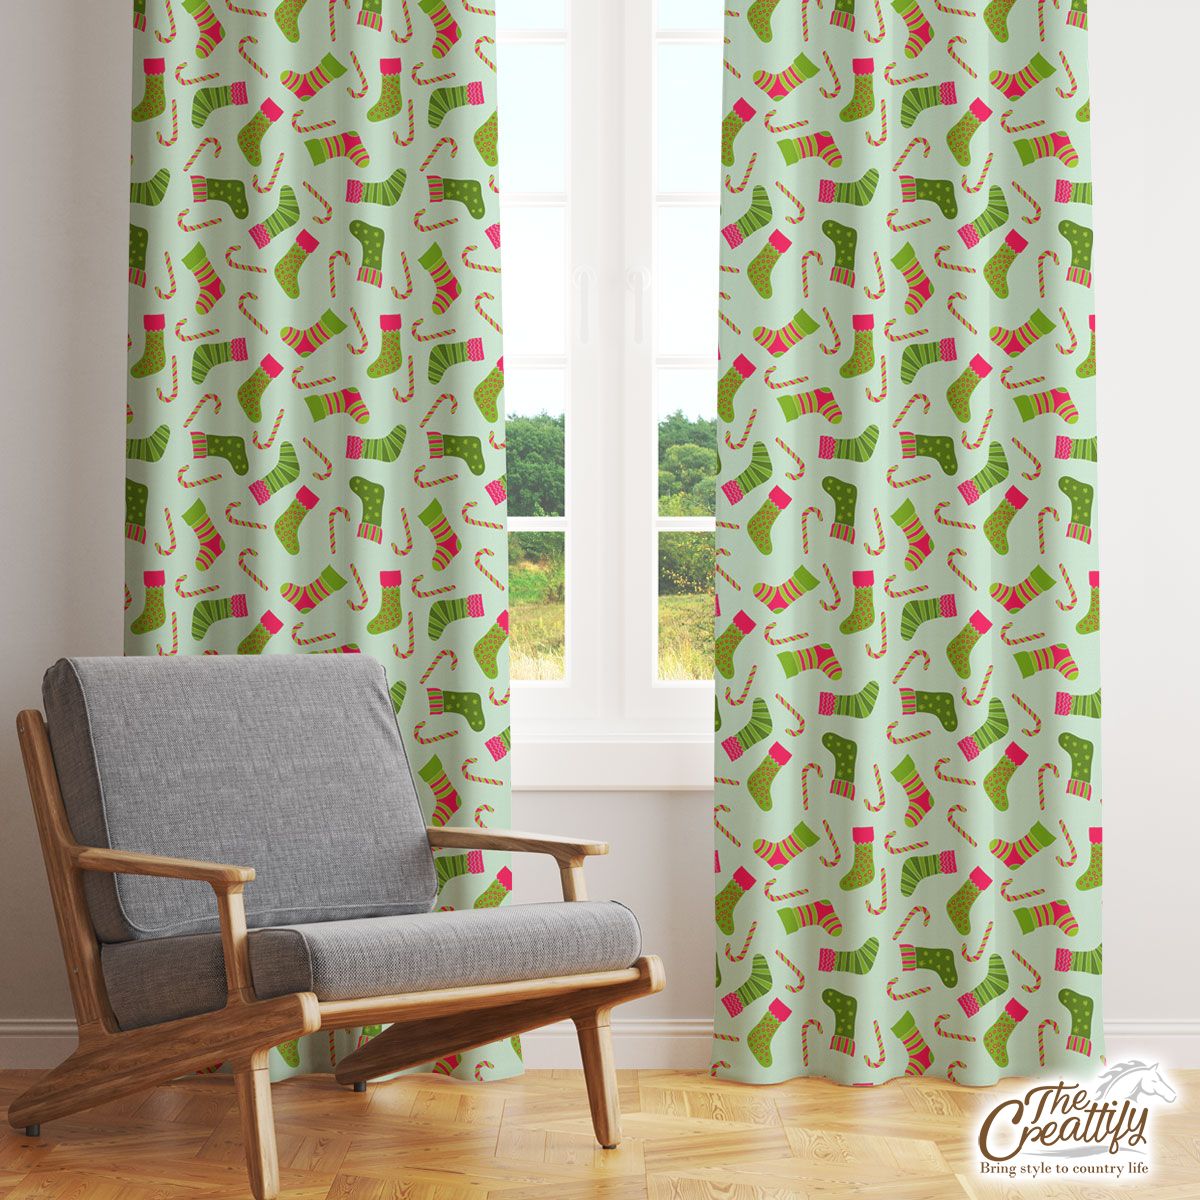 Christmas Socks, Colorful Socks And Candy Canes Window Curtain